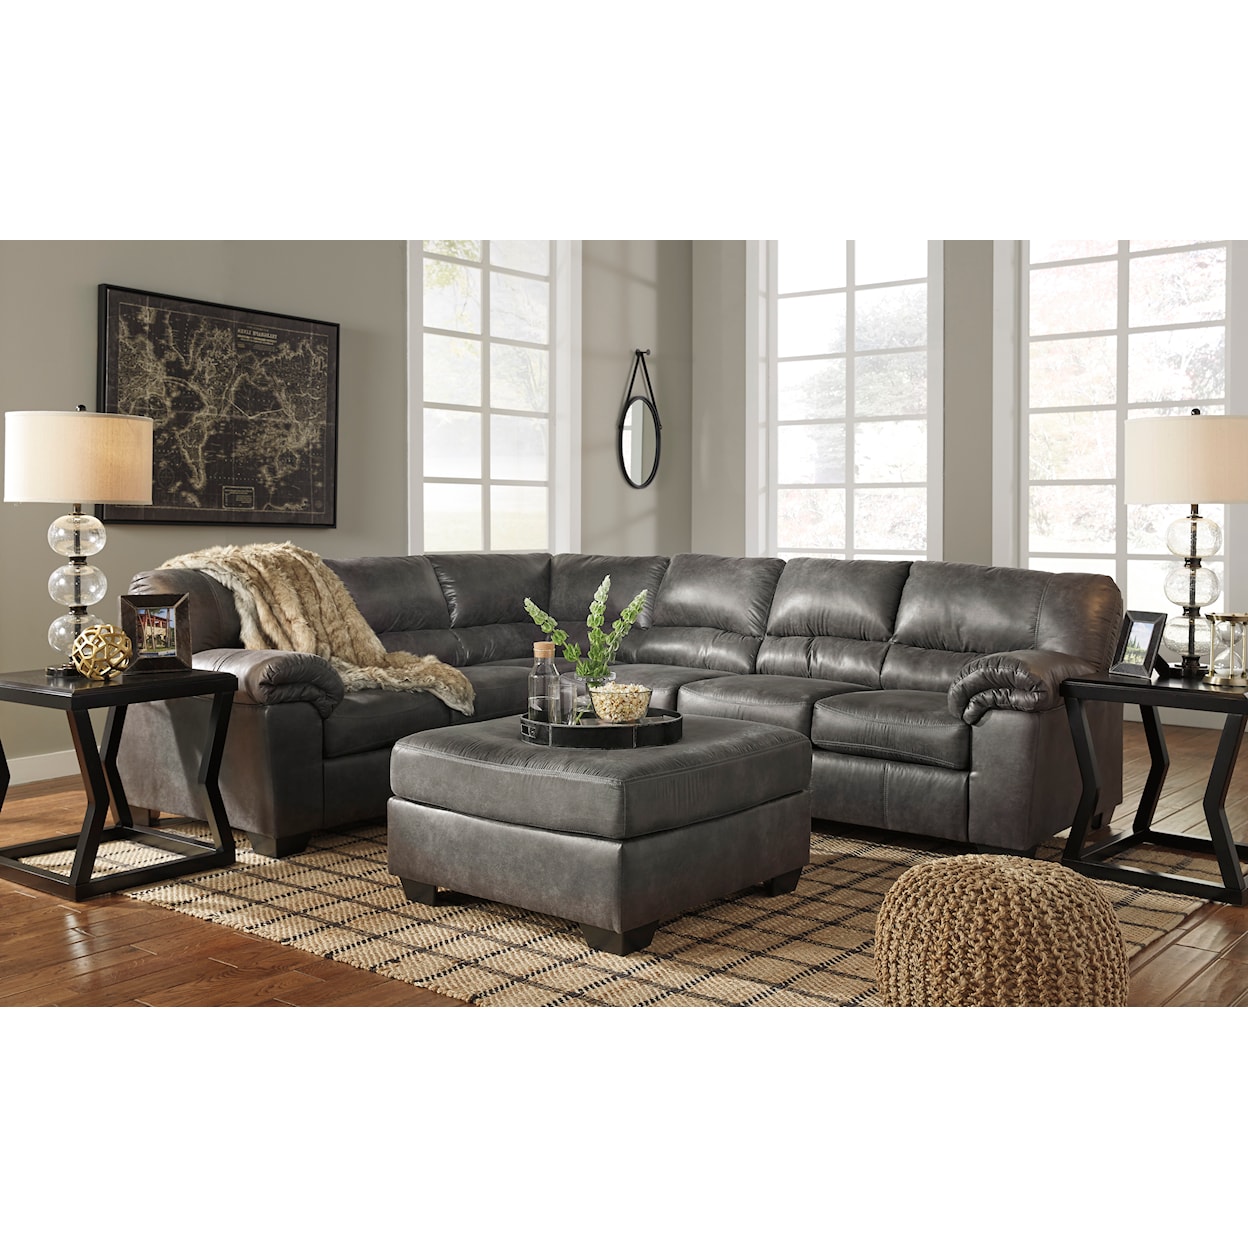 Signature Design by Ashley Bladen 3-Piece Sectional with Ottoman